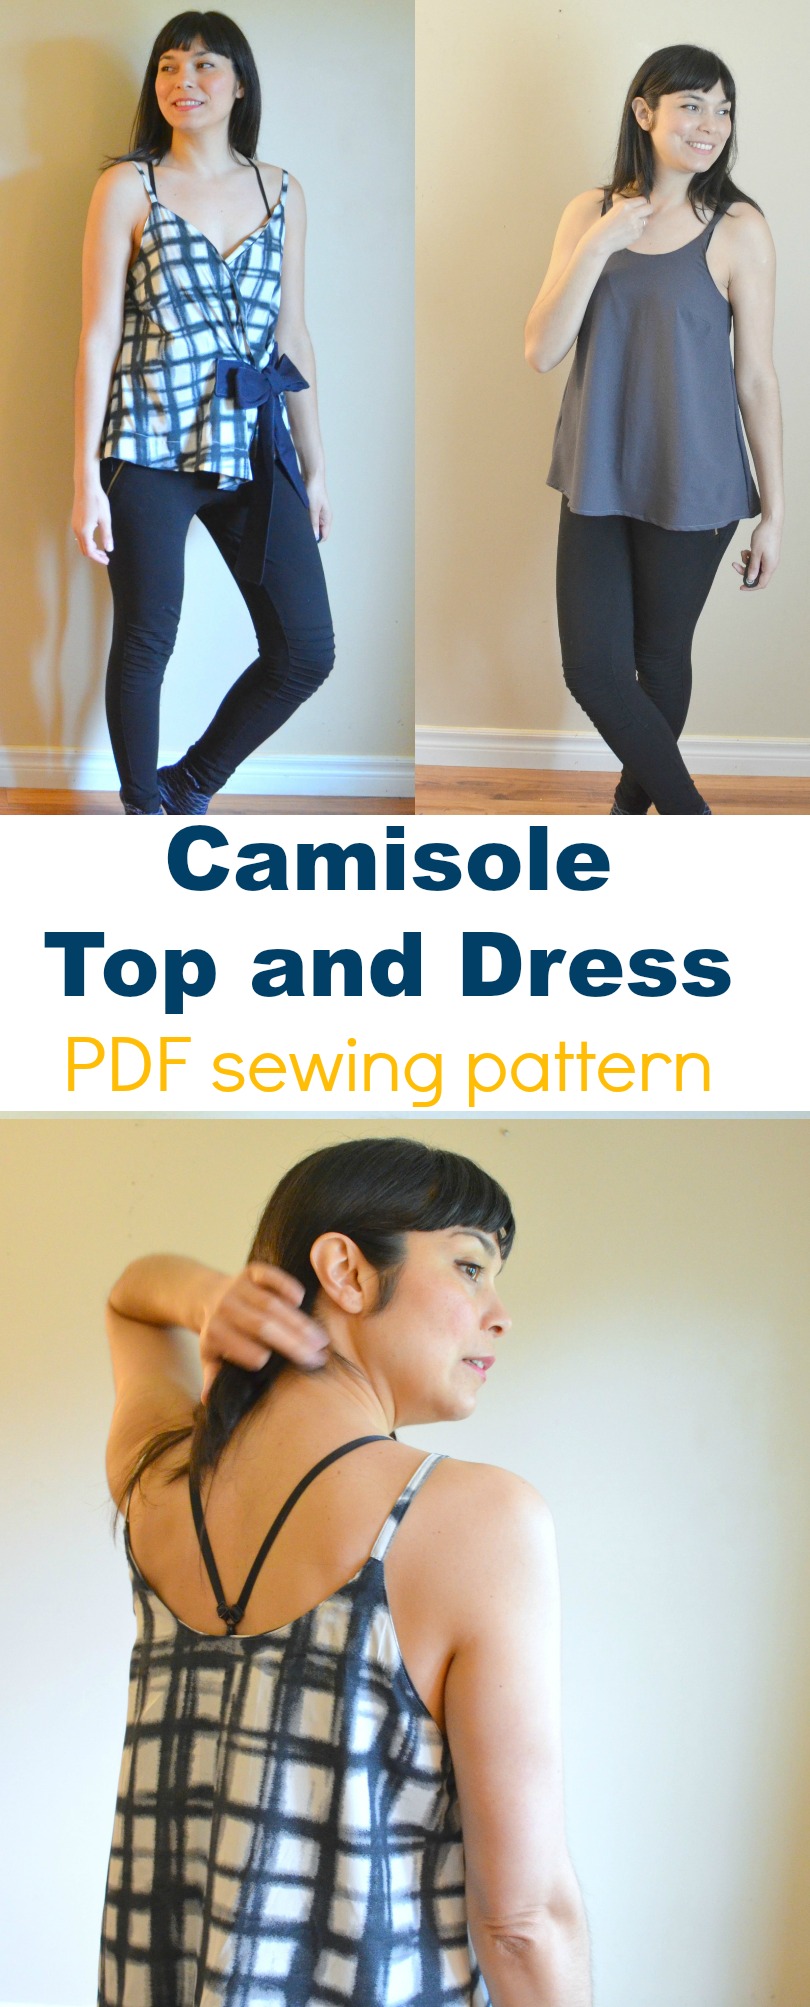 Introducing the Camisole Top and Dress PDF sewing pattern